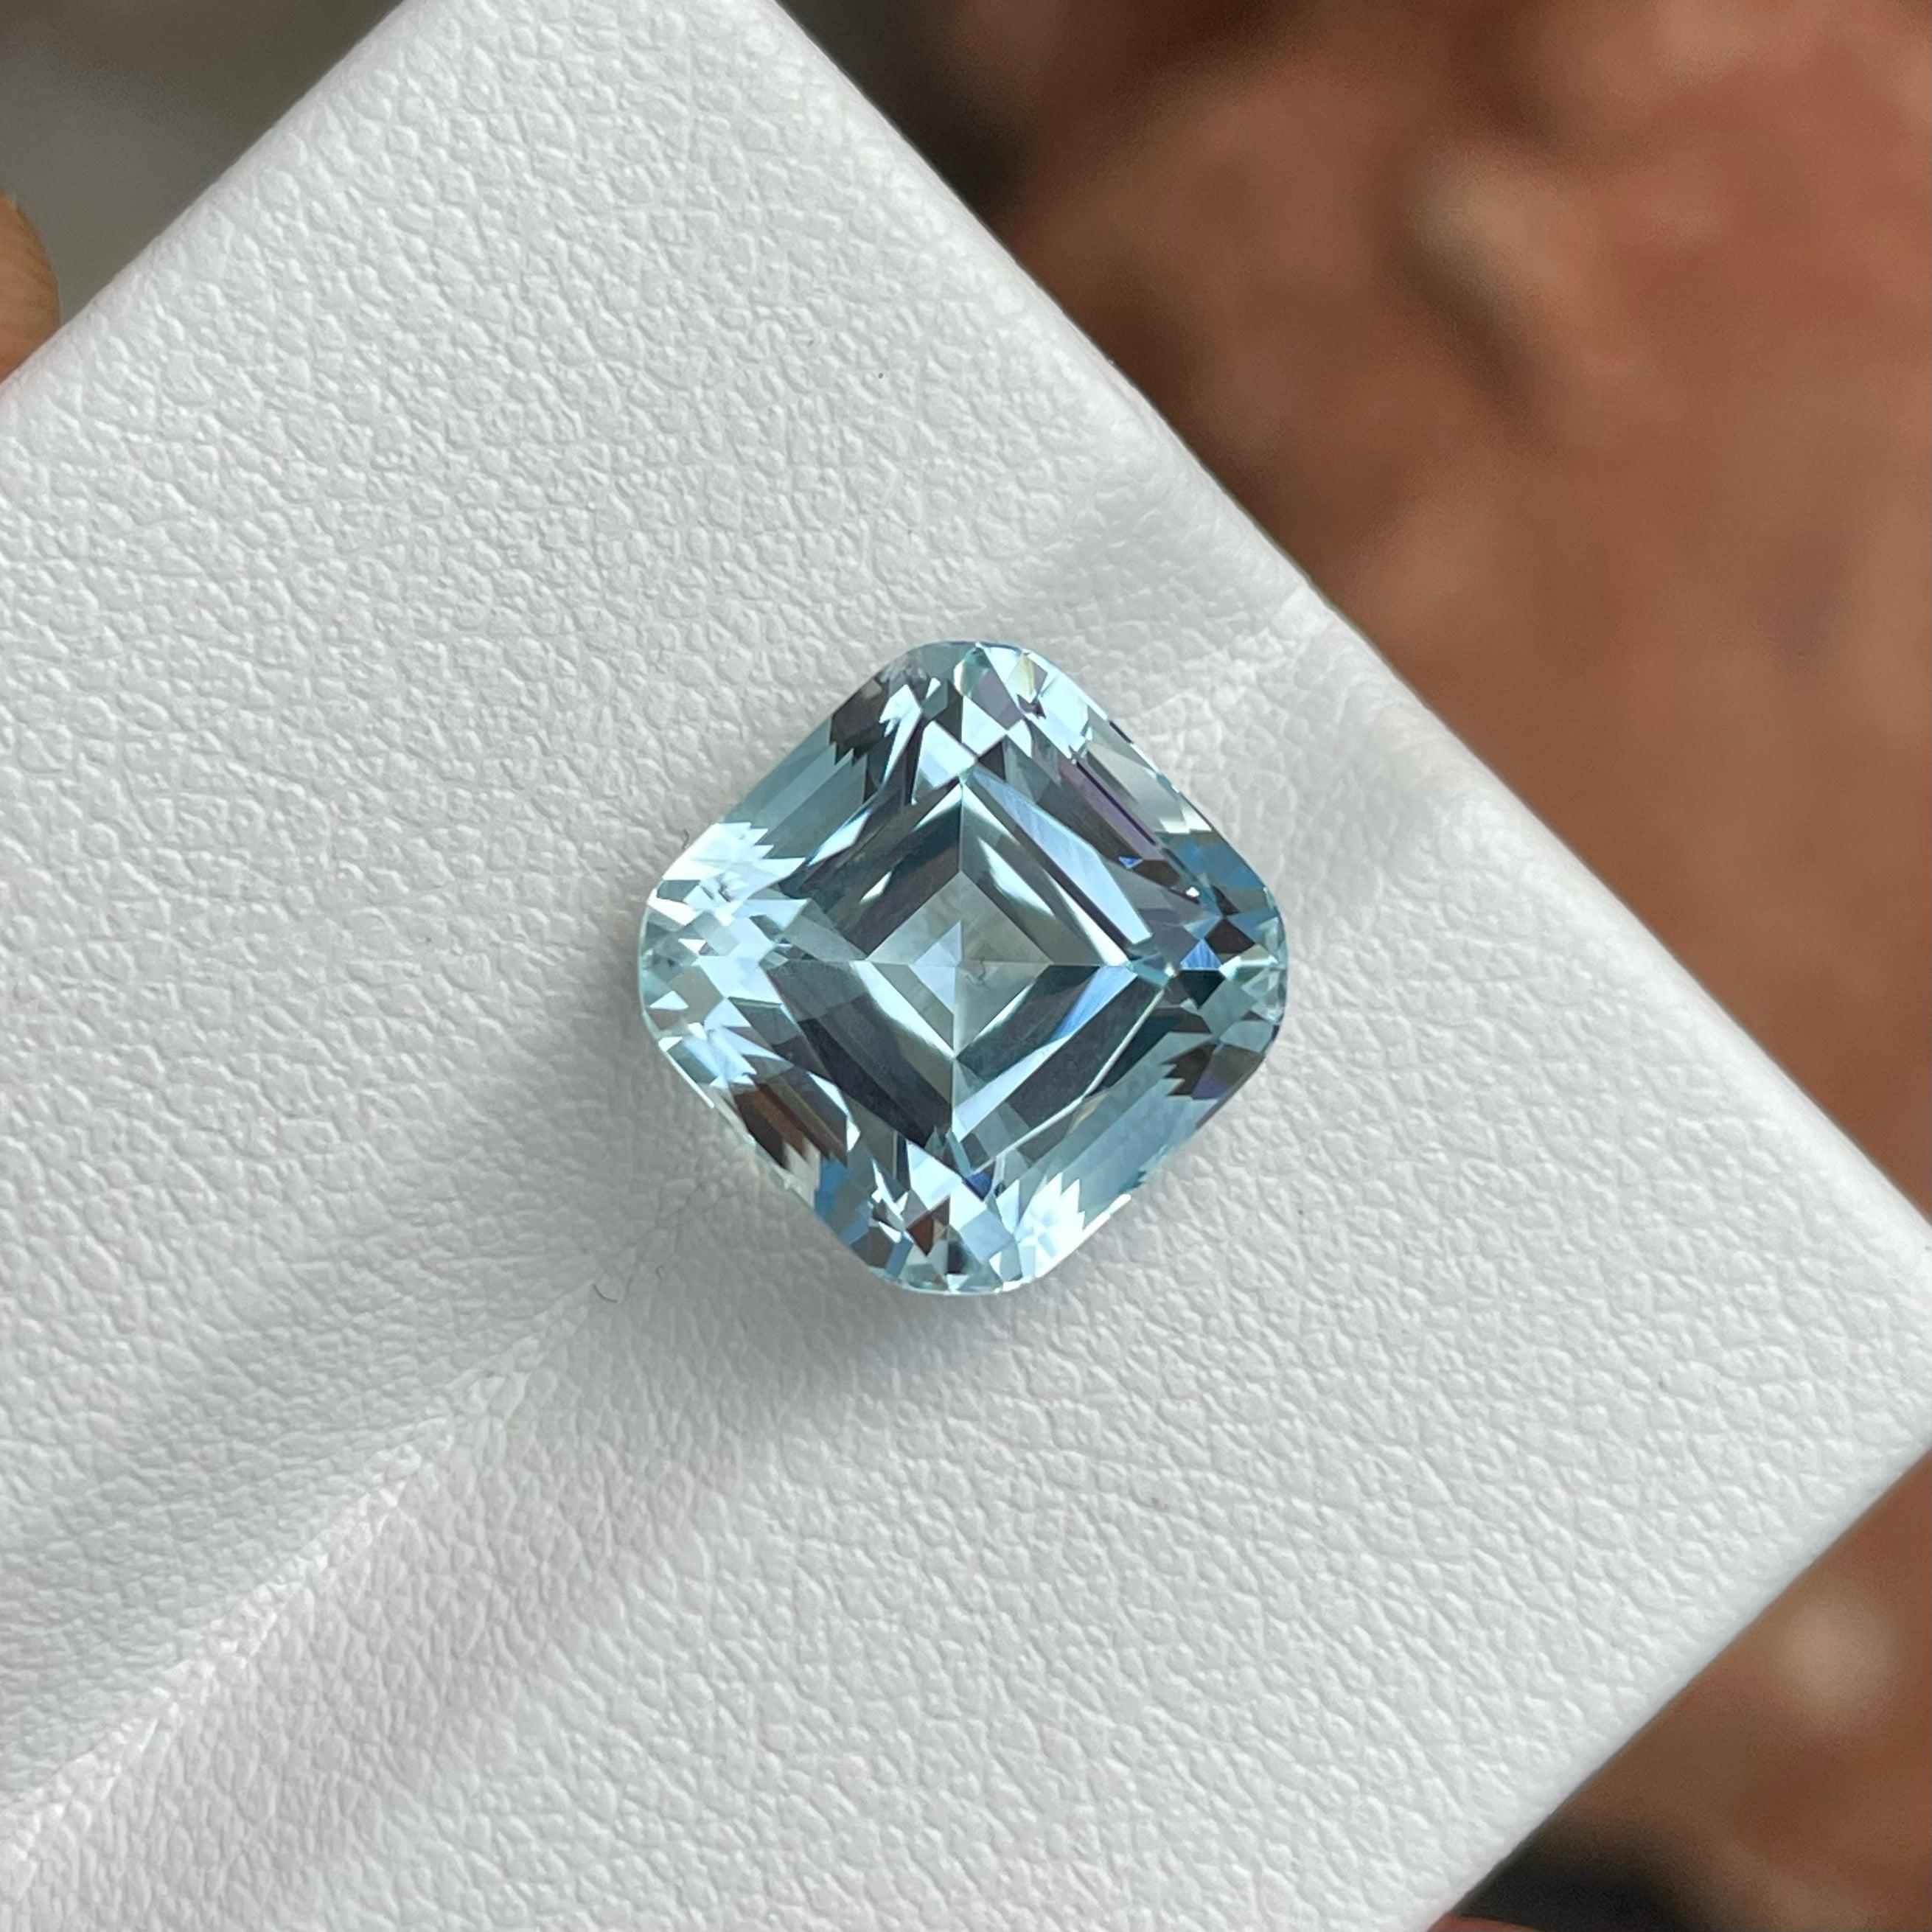 Spectacular Natural  Aquamarine Gemstone, available for sale at wholesale price natural high quality 6.85 Carats Eye Clean Clarity Loose Aquamarine from Pakistan.

Product Information:
GEMSTONE NAME: Spectacular Natural  Aquamarine